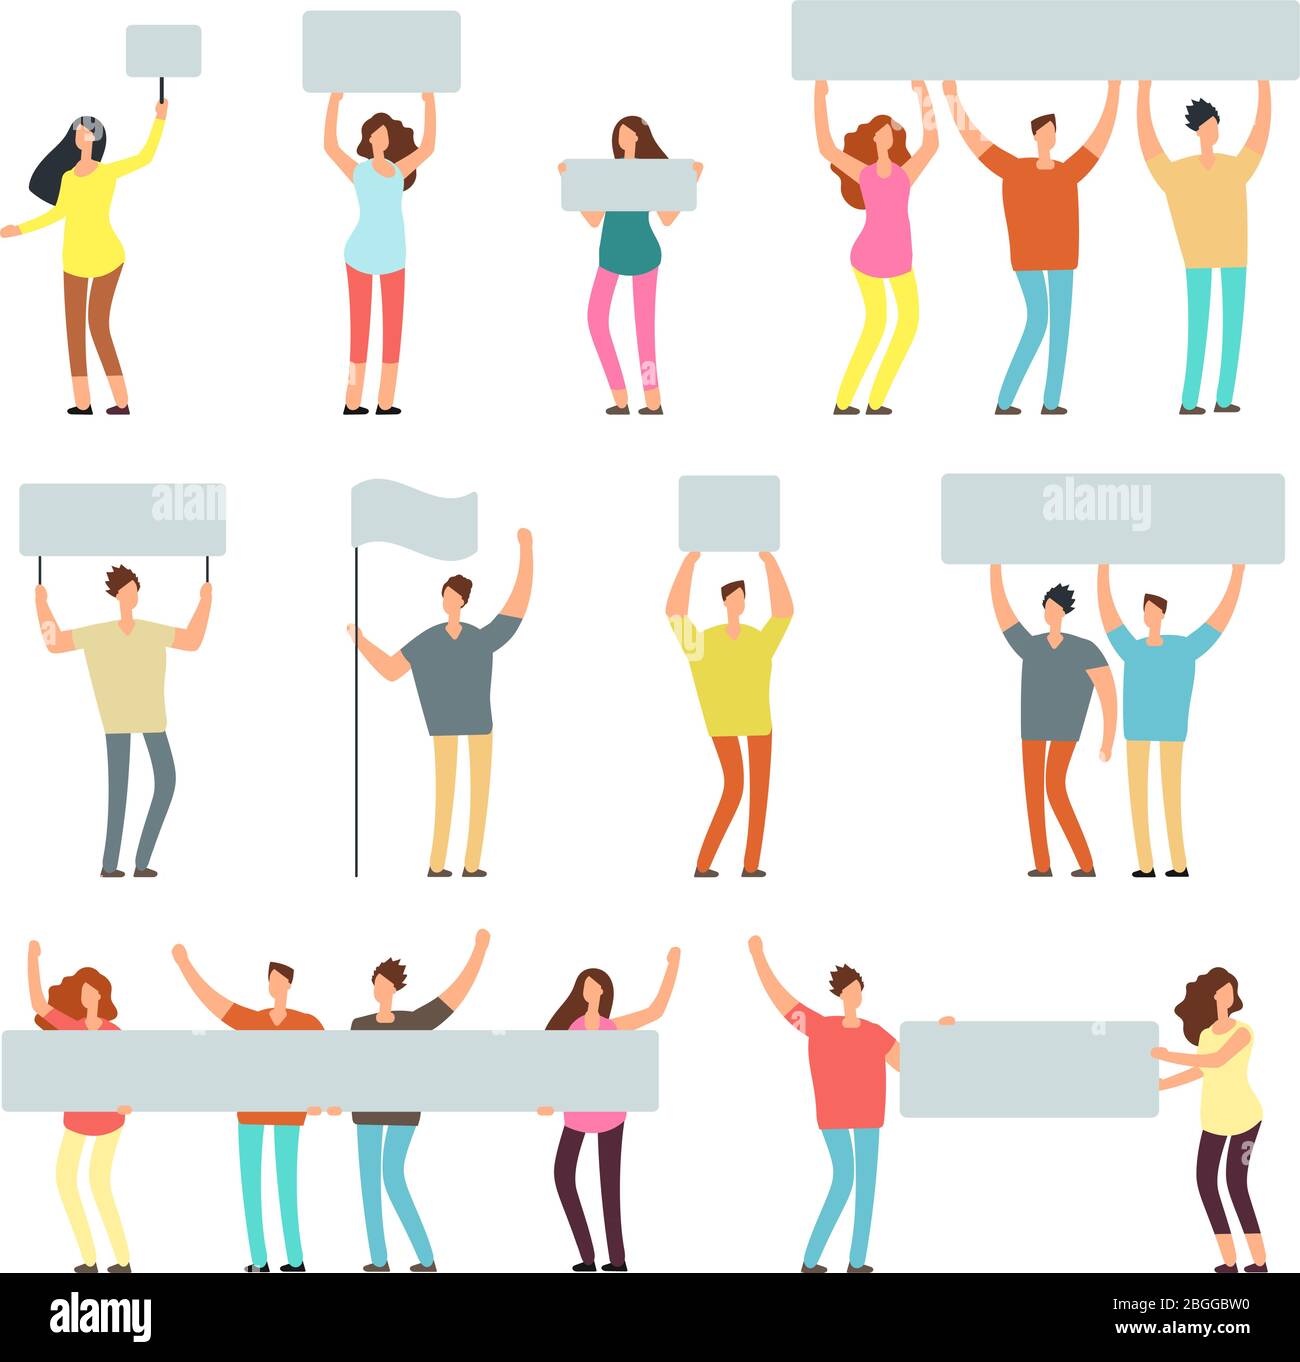 Peaceful man, woman holding banners and placards. People at demonstration, picket. Vector isolated characters for peace protest concept. Demonstration with placard, picket worker illustration Stock Vector